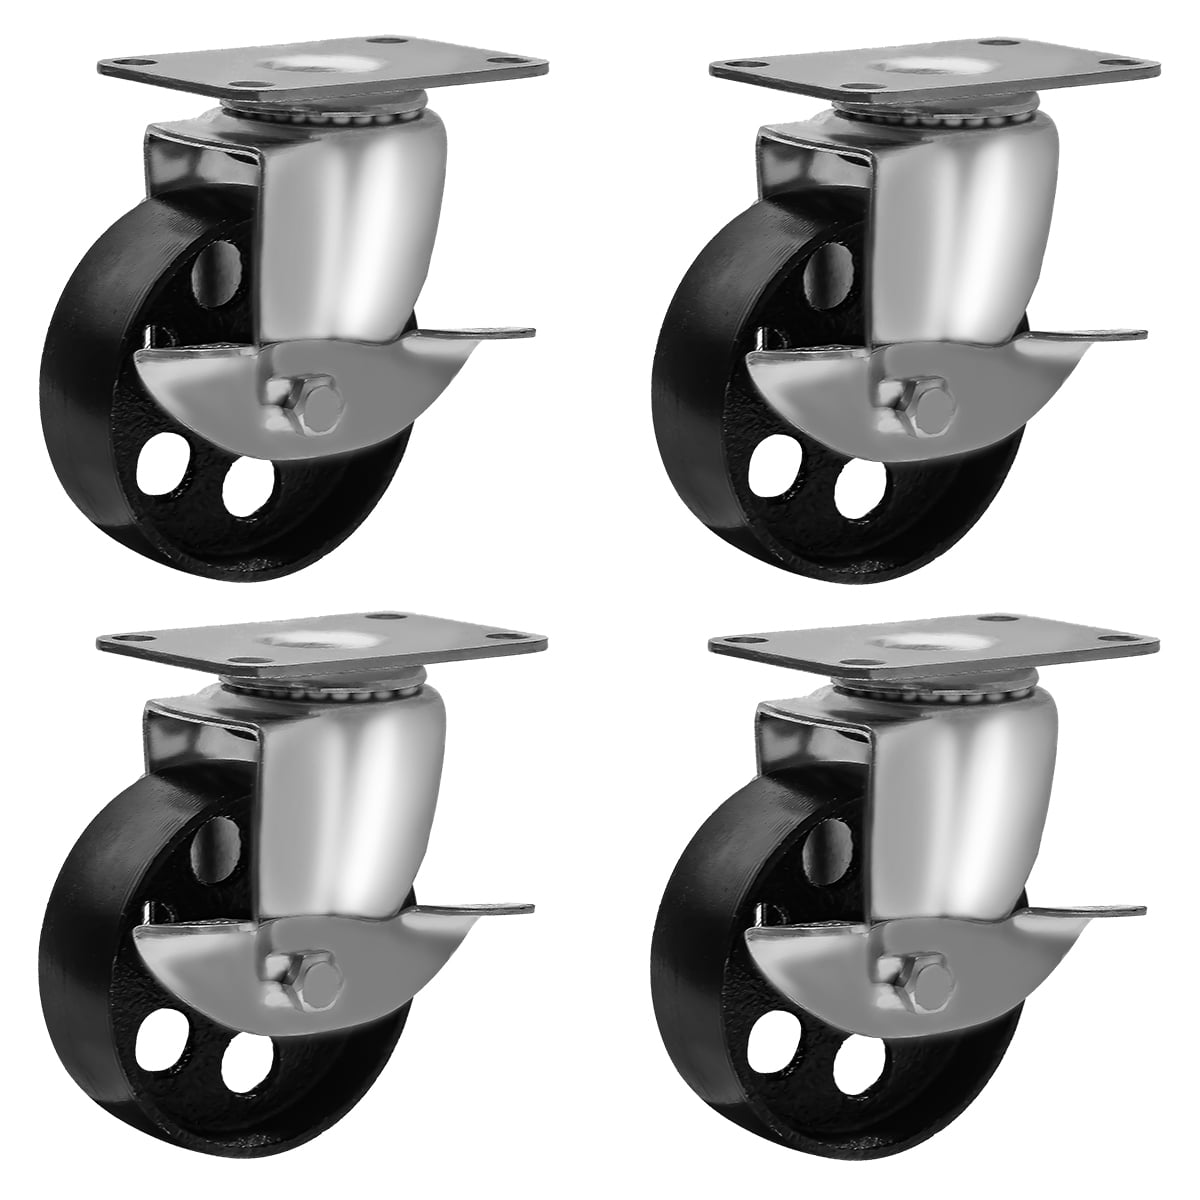 Set of 4 All Steel Swivel Plate Caster Wheels with Brakes Locking Heavy Duty H 